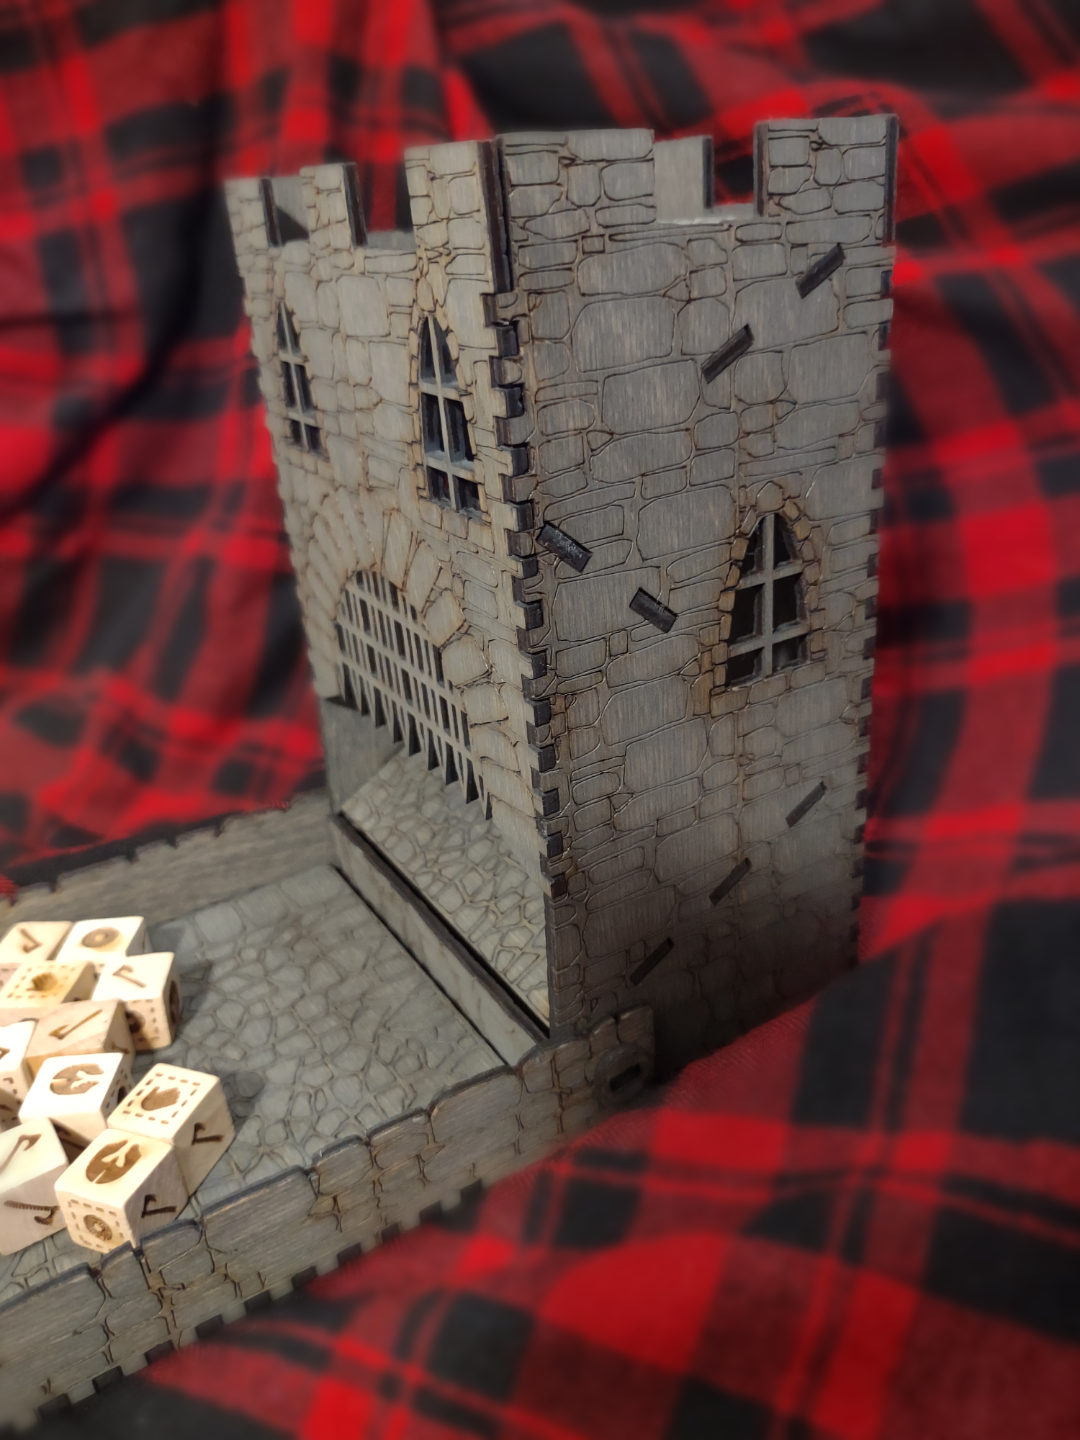 DnD Castle Wooden Dice Tower | Folding Castle Dice Tower | Dungeons and Dragons | Dice Tower Gift | Gamer Gift | Gift for Him